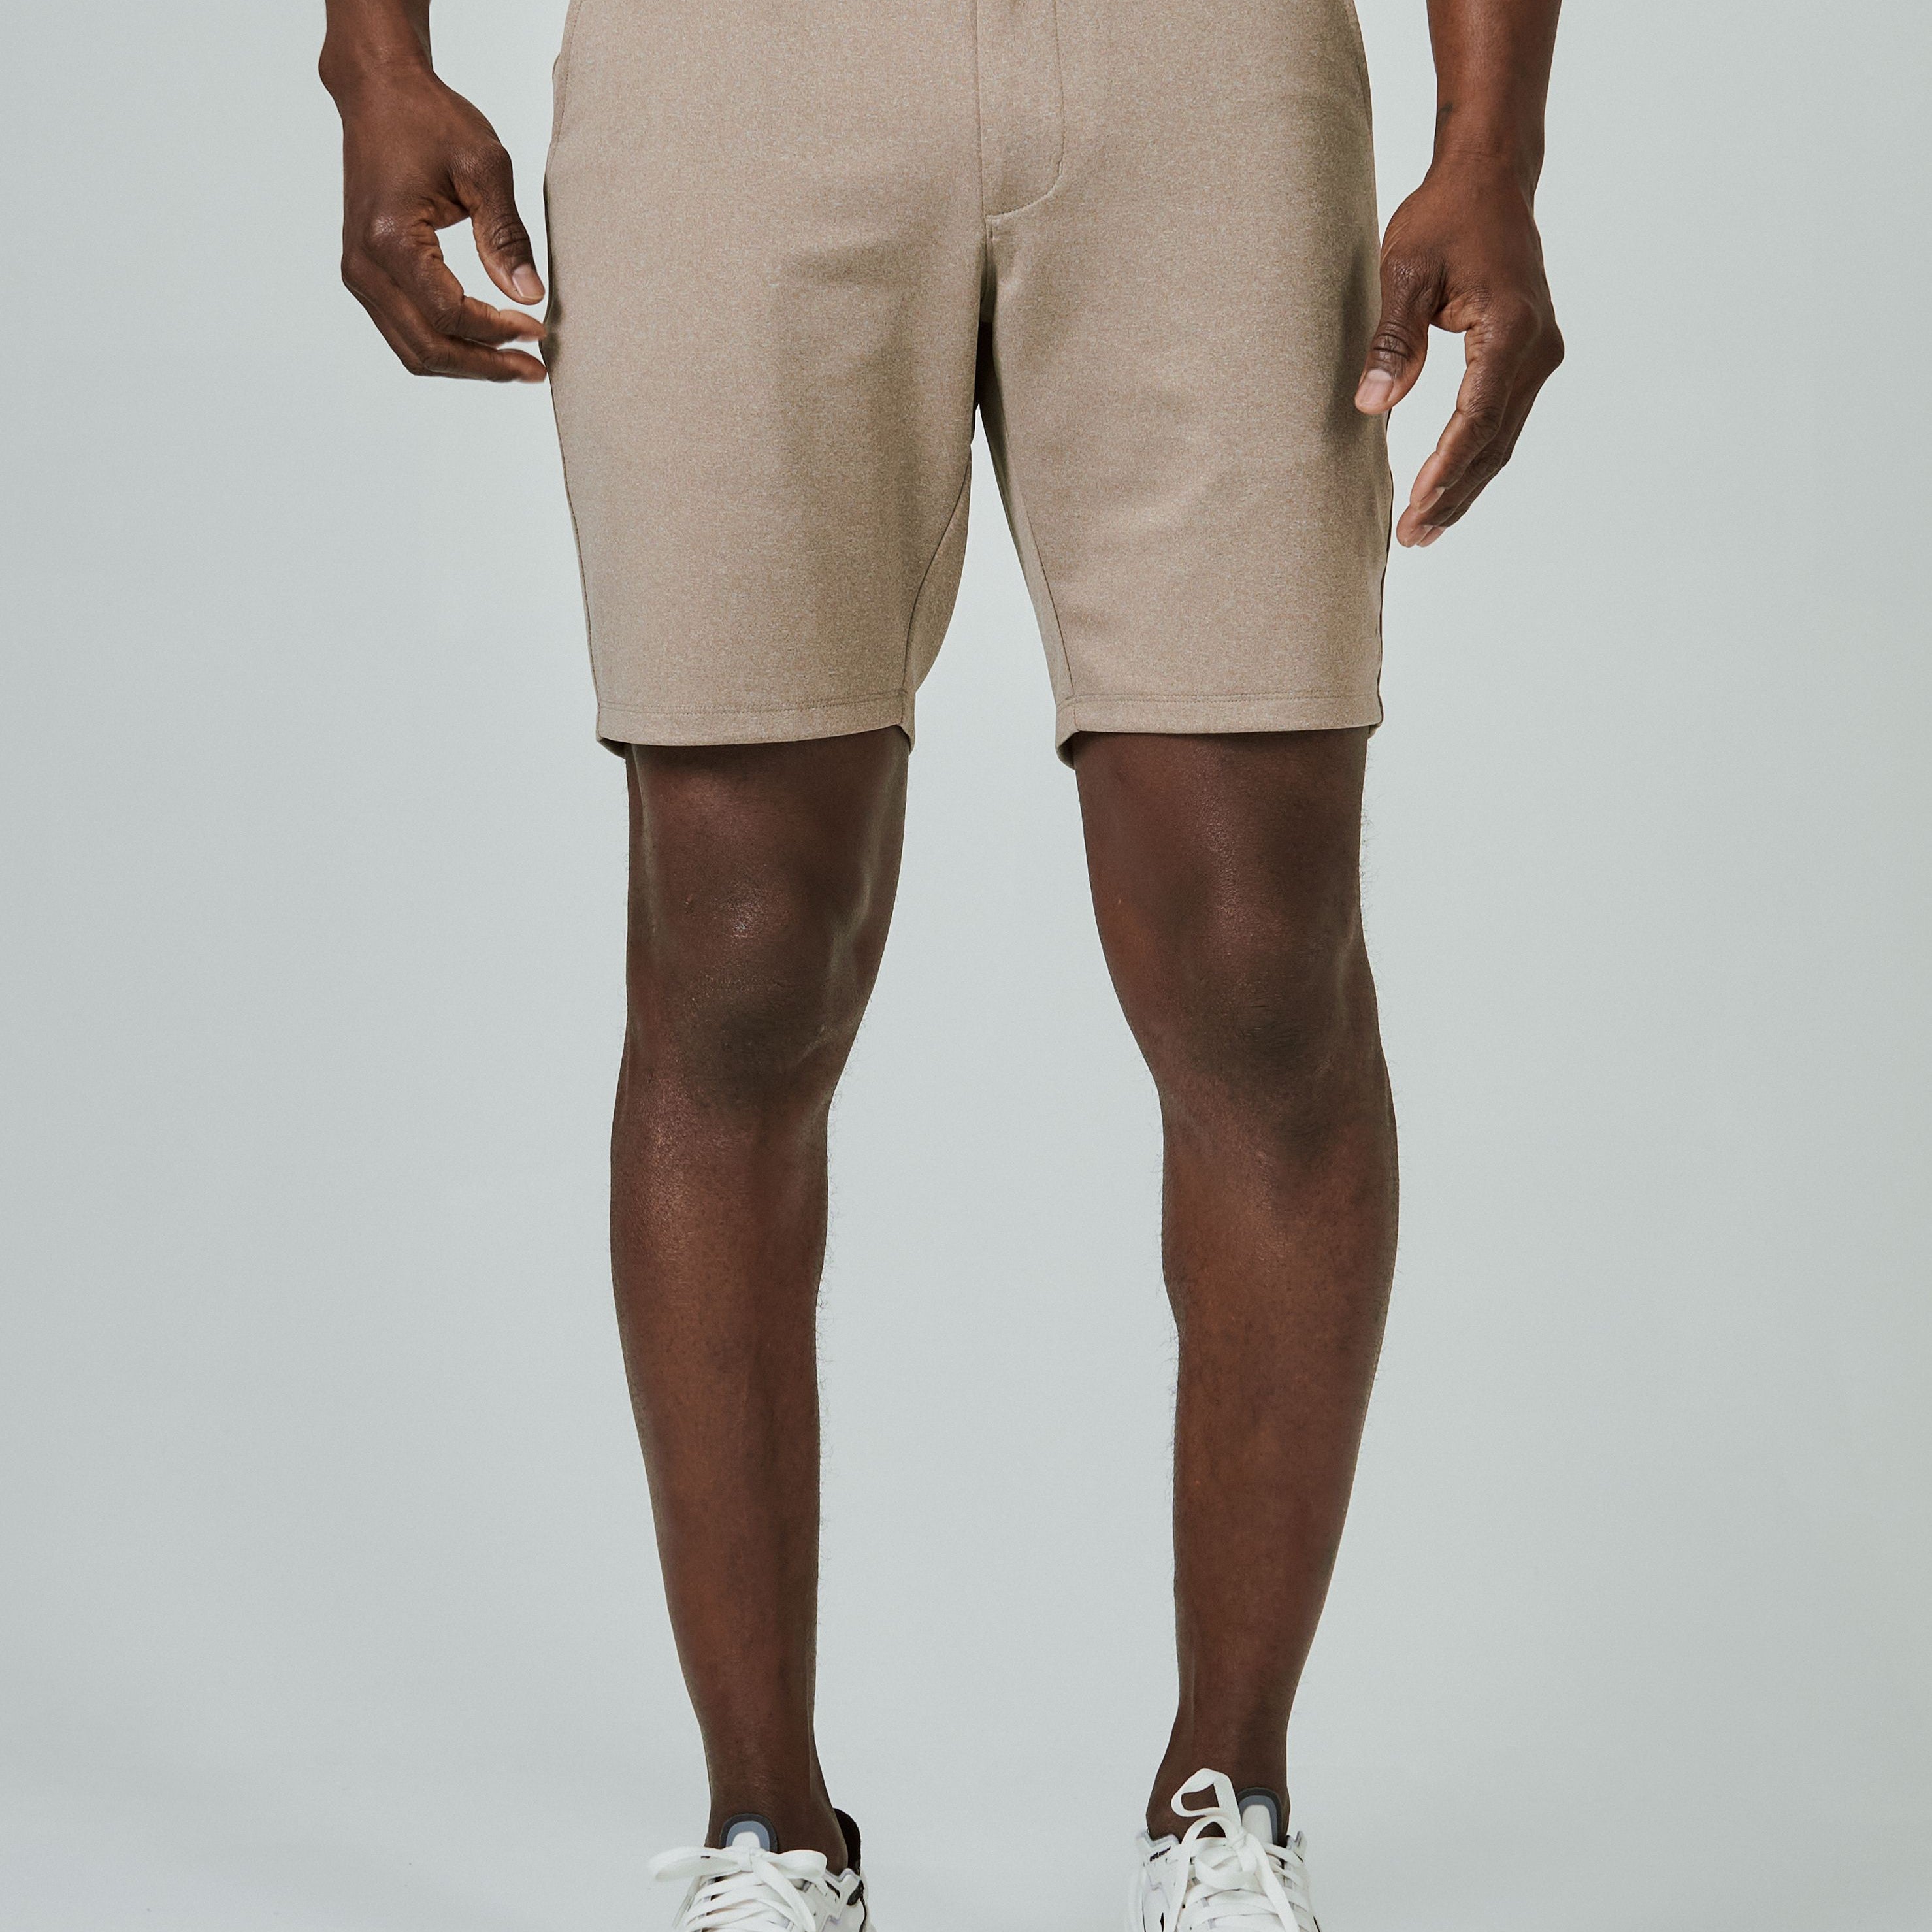 A Game 8" Shorts-Men's Bottoms-Vixen Collection, Day Spa and Women's Boutique Located in Seattle, Washington